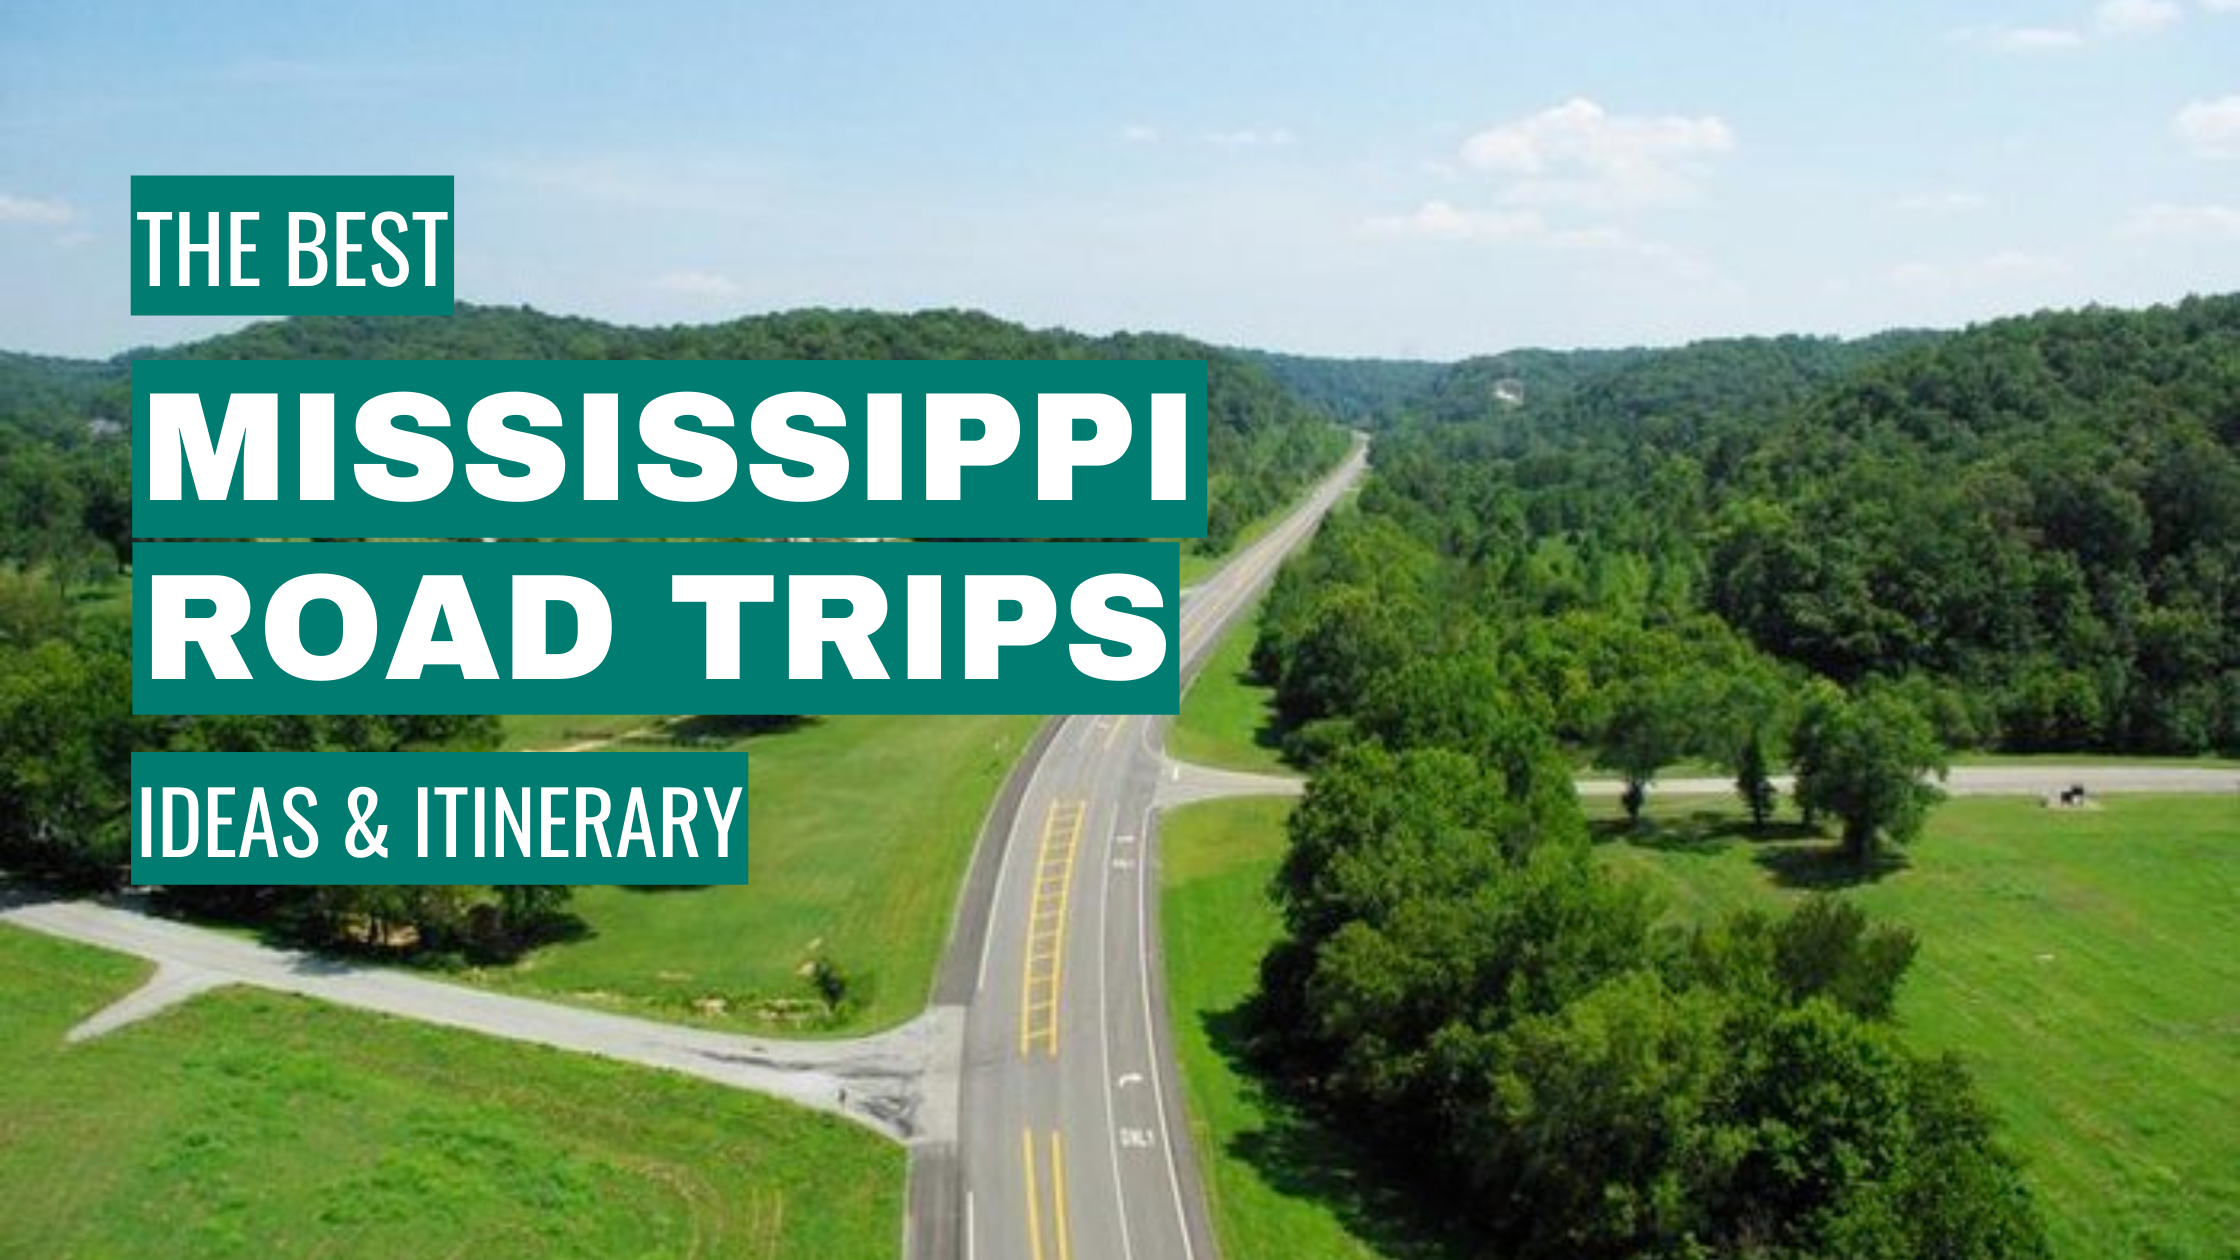 Travel Guide to Brookhaven, Mississippi - Country Roads Magazine